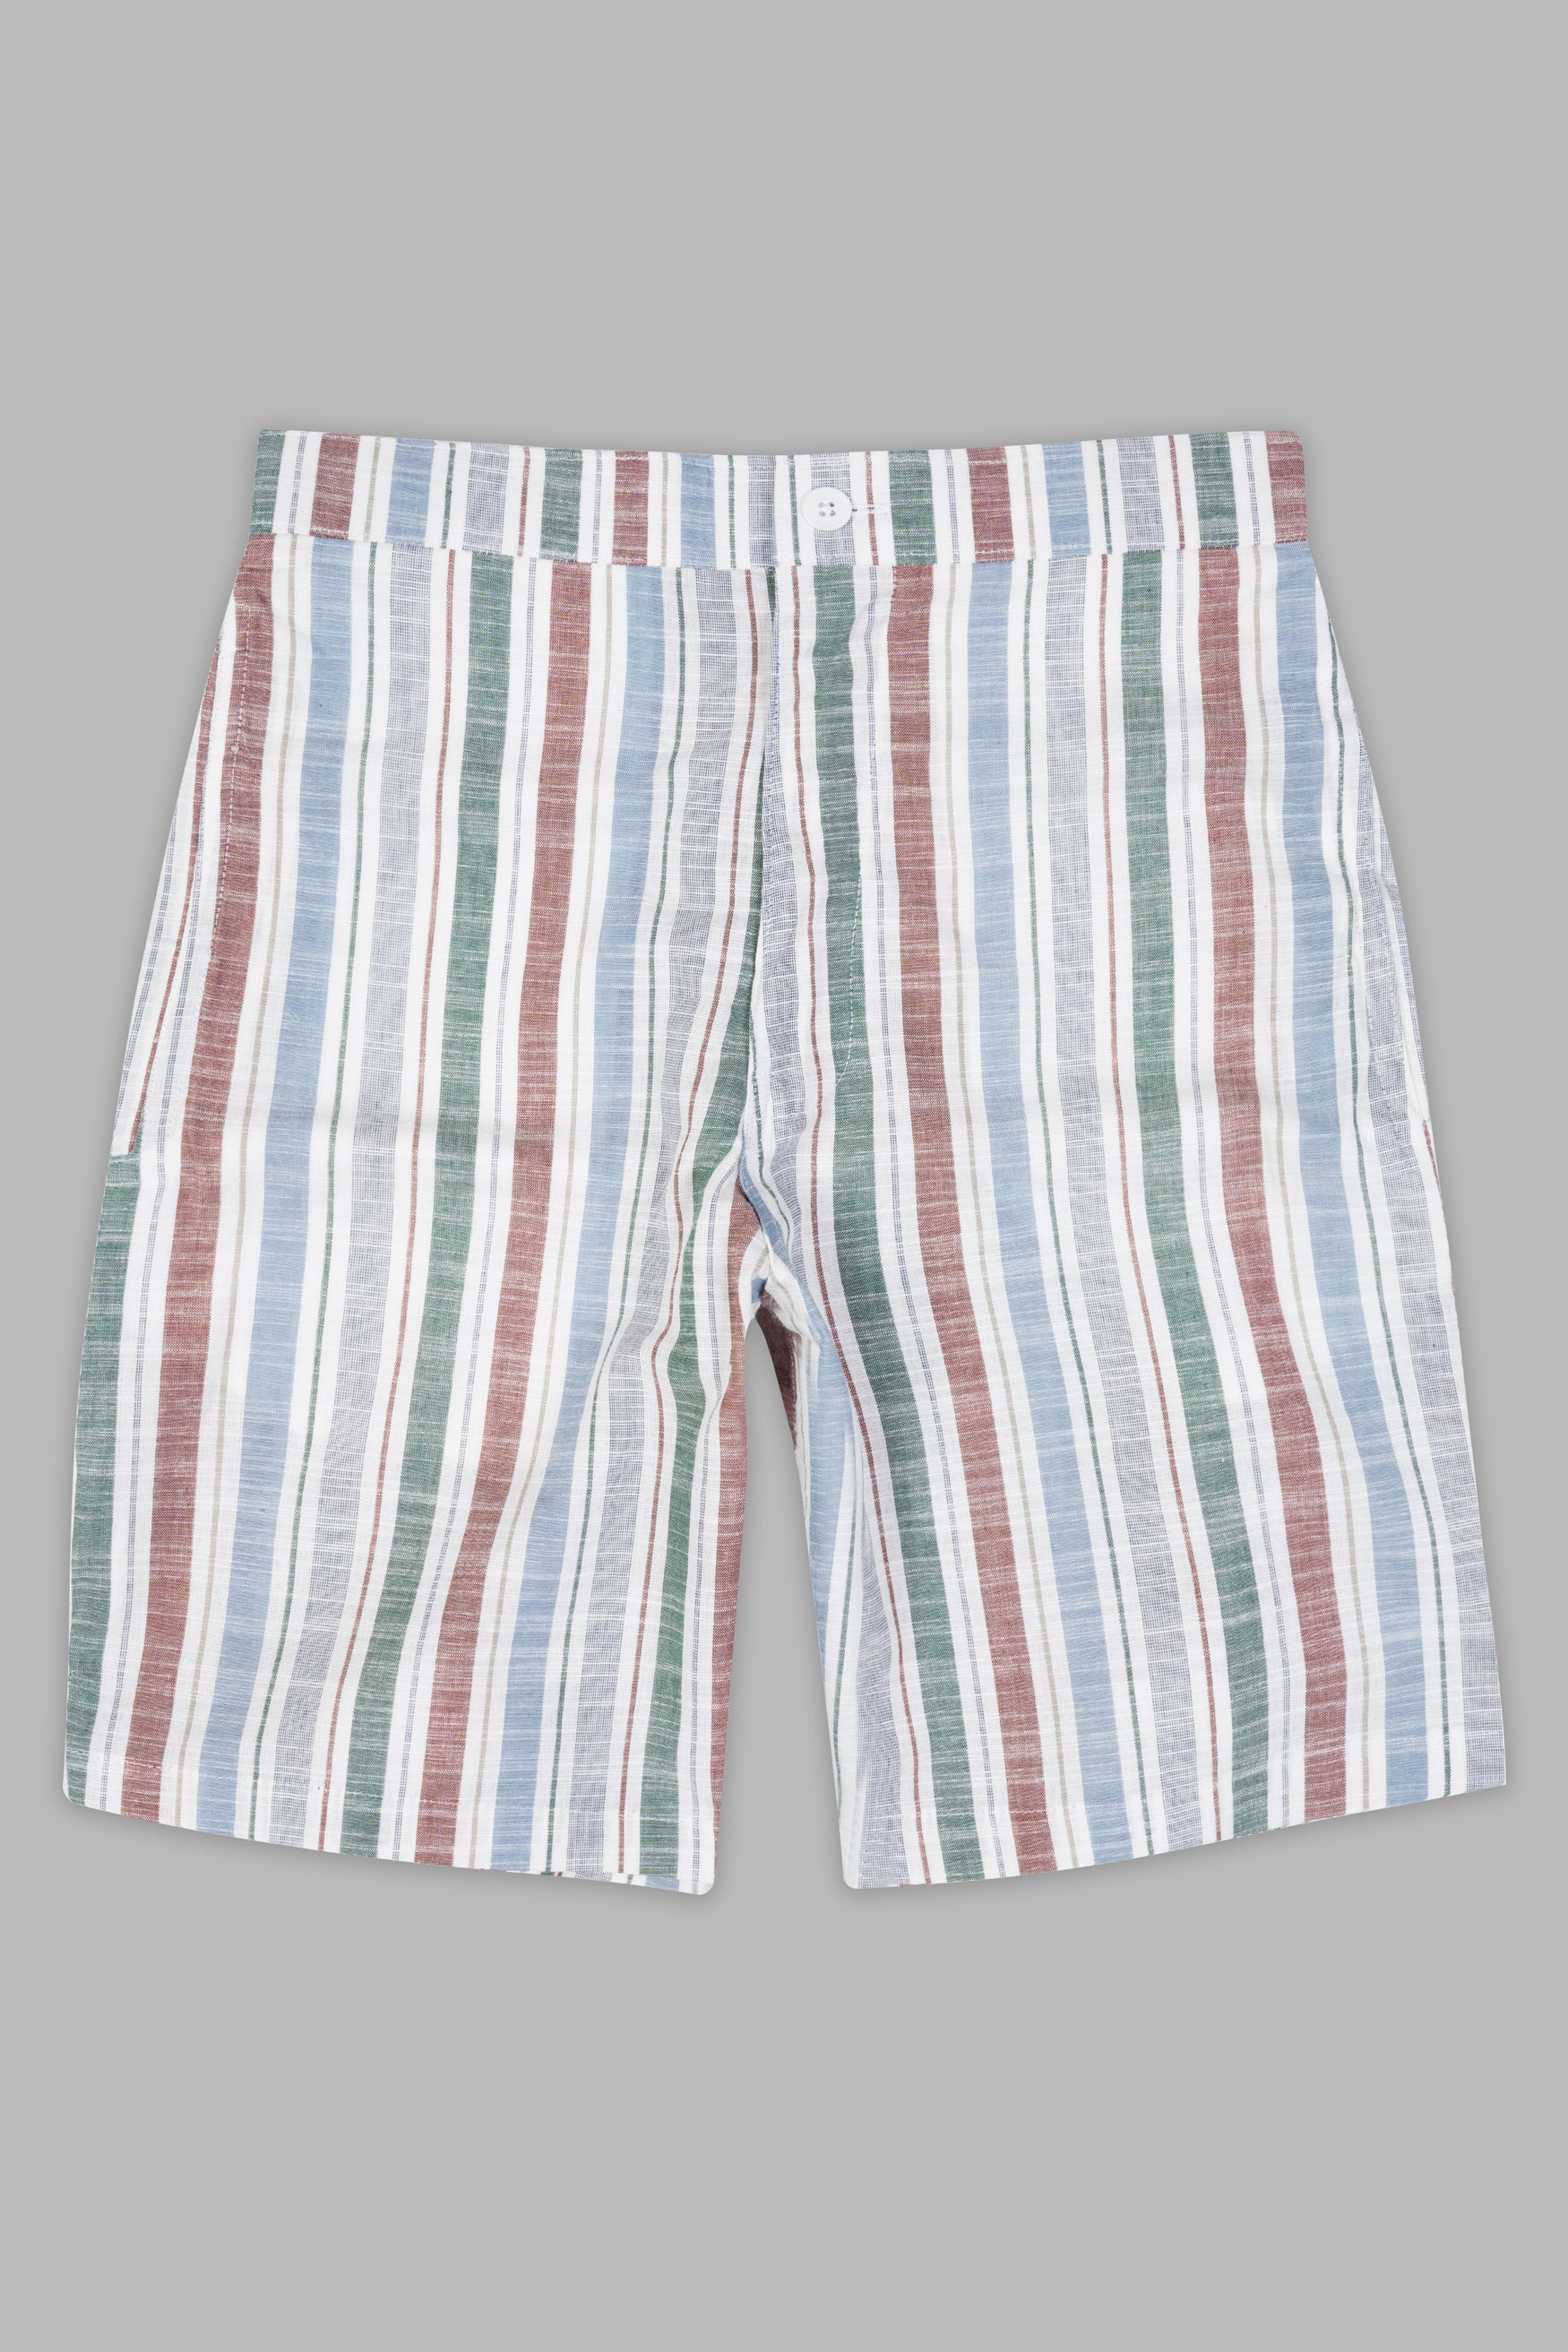 Bright White with Chambray Blue and Multi color Stripes Luxurious Linen Shorts